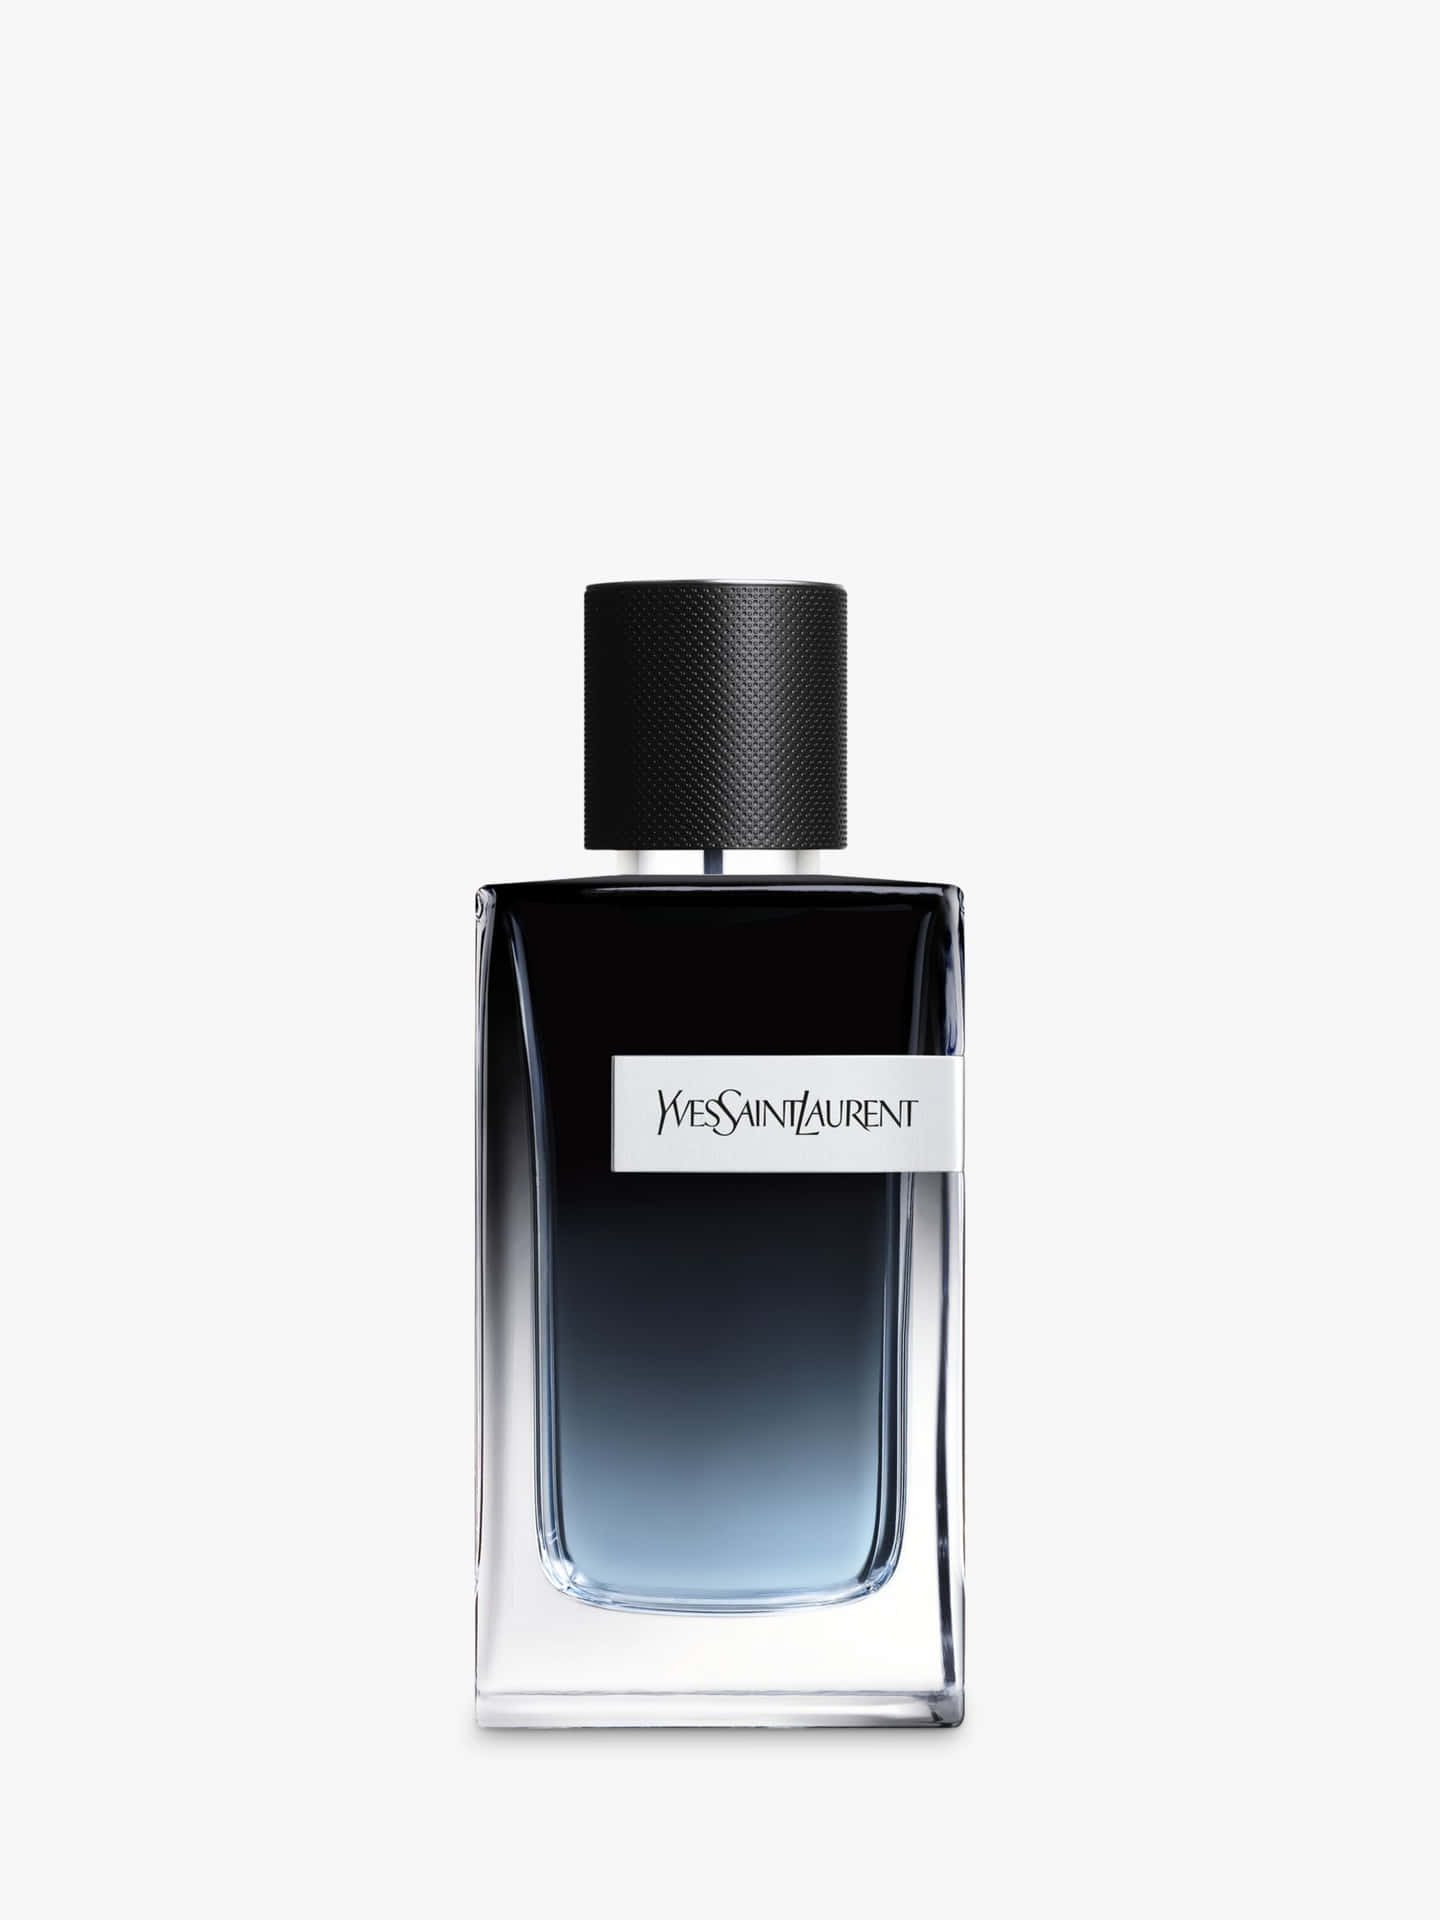 a bottle of cologne on a white background